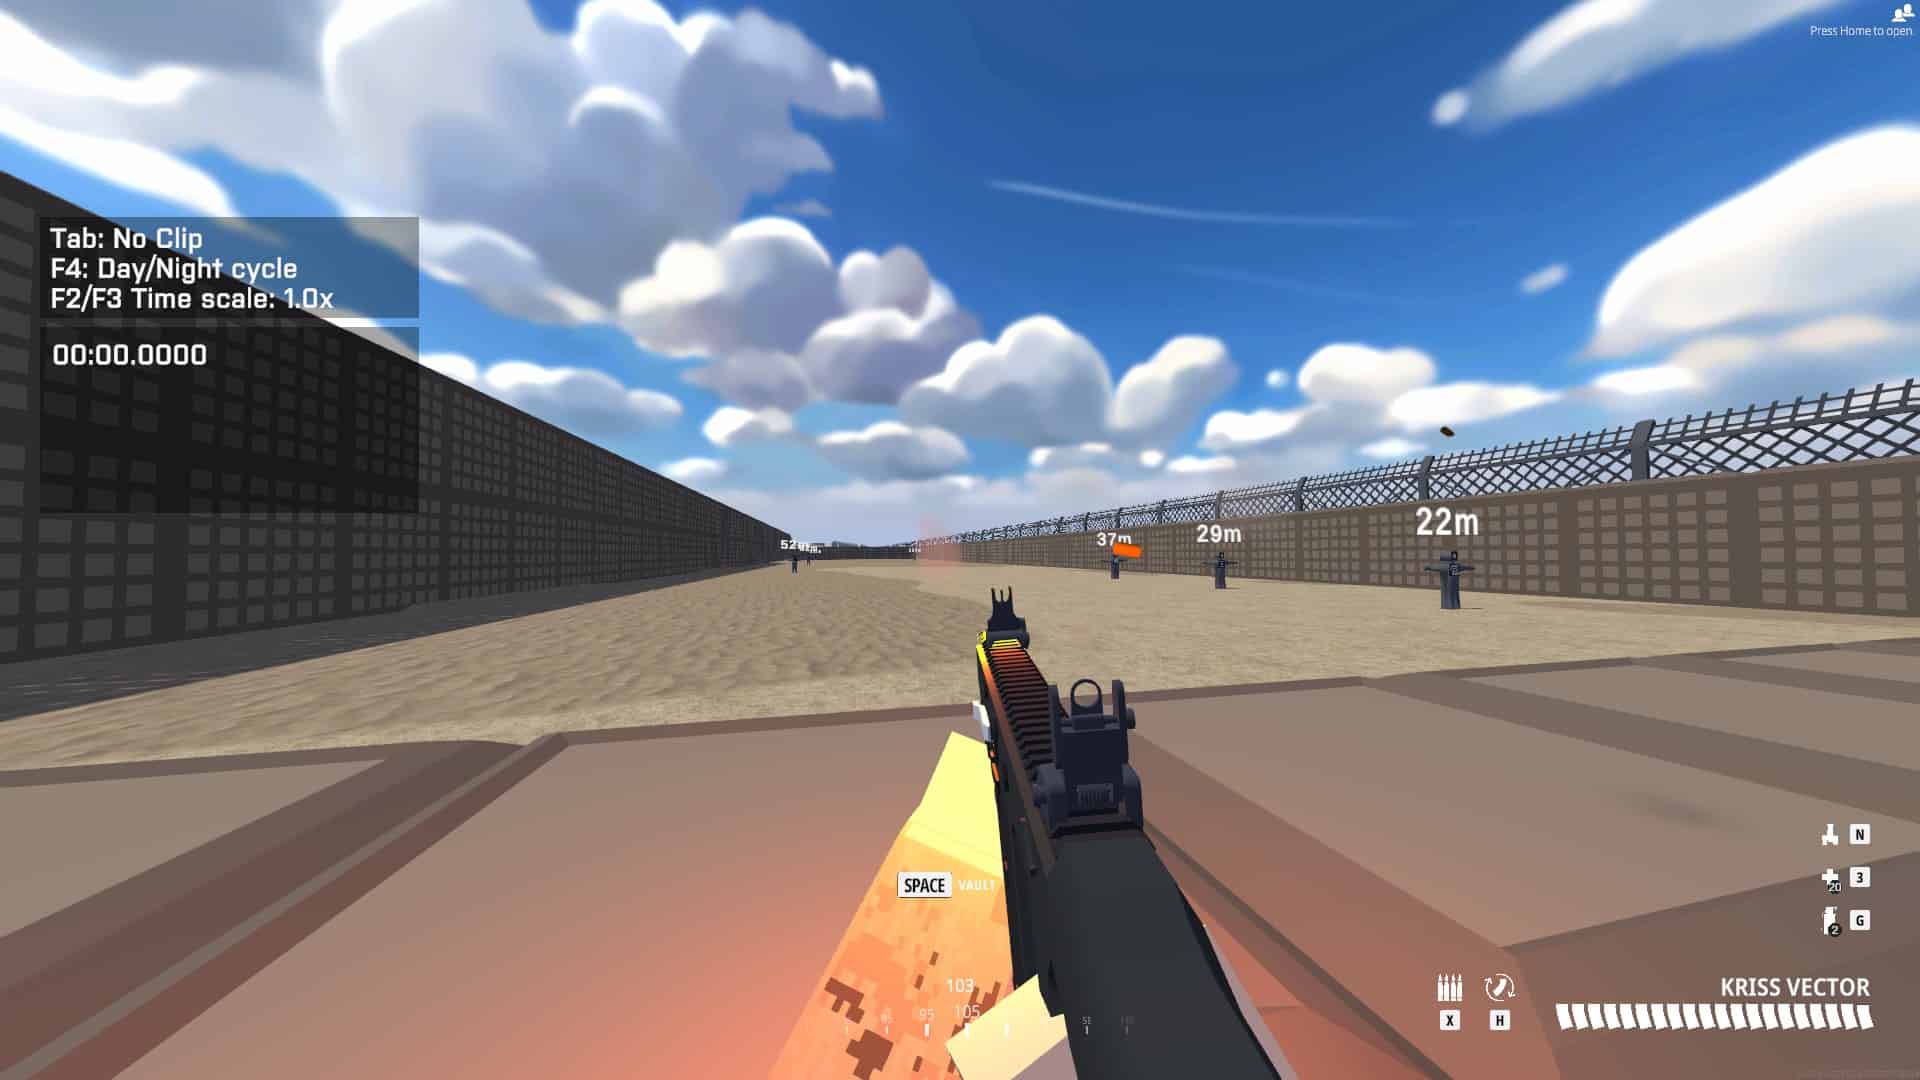 BattleBit Remastered best weapons: An image of the Kriss Vector weapon used in a training range in BattleBit Remastered.